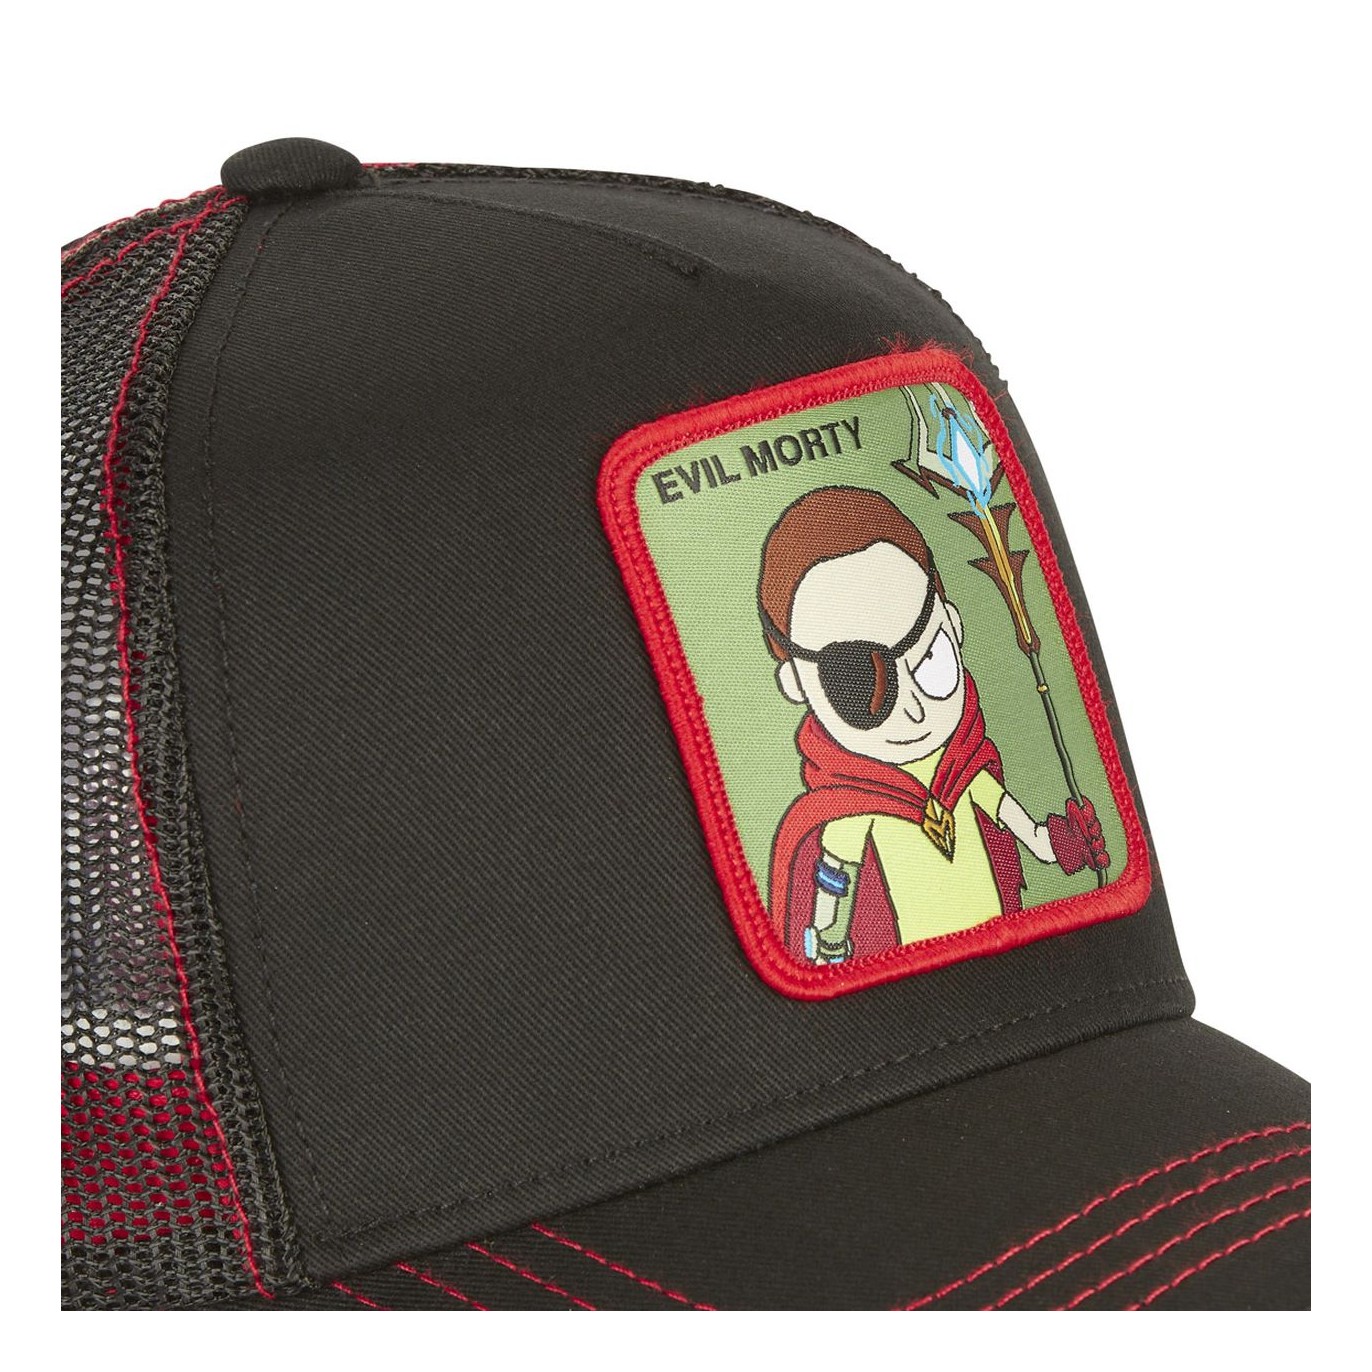 Casquette trucker avec filet Rick and Morty Morty Capslab - 3